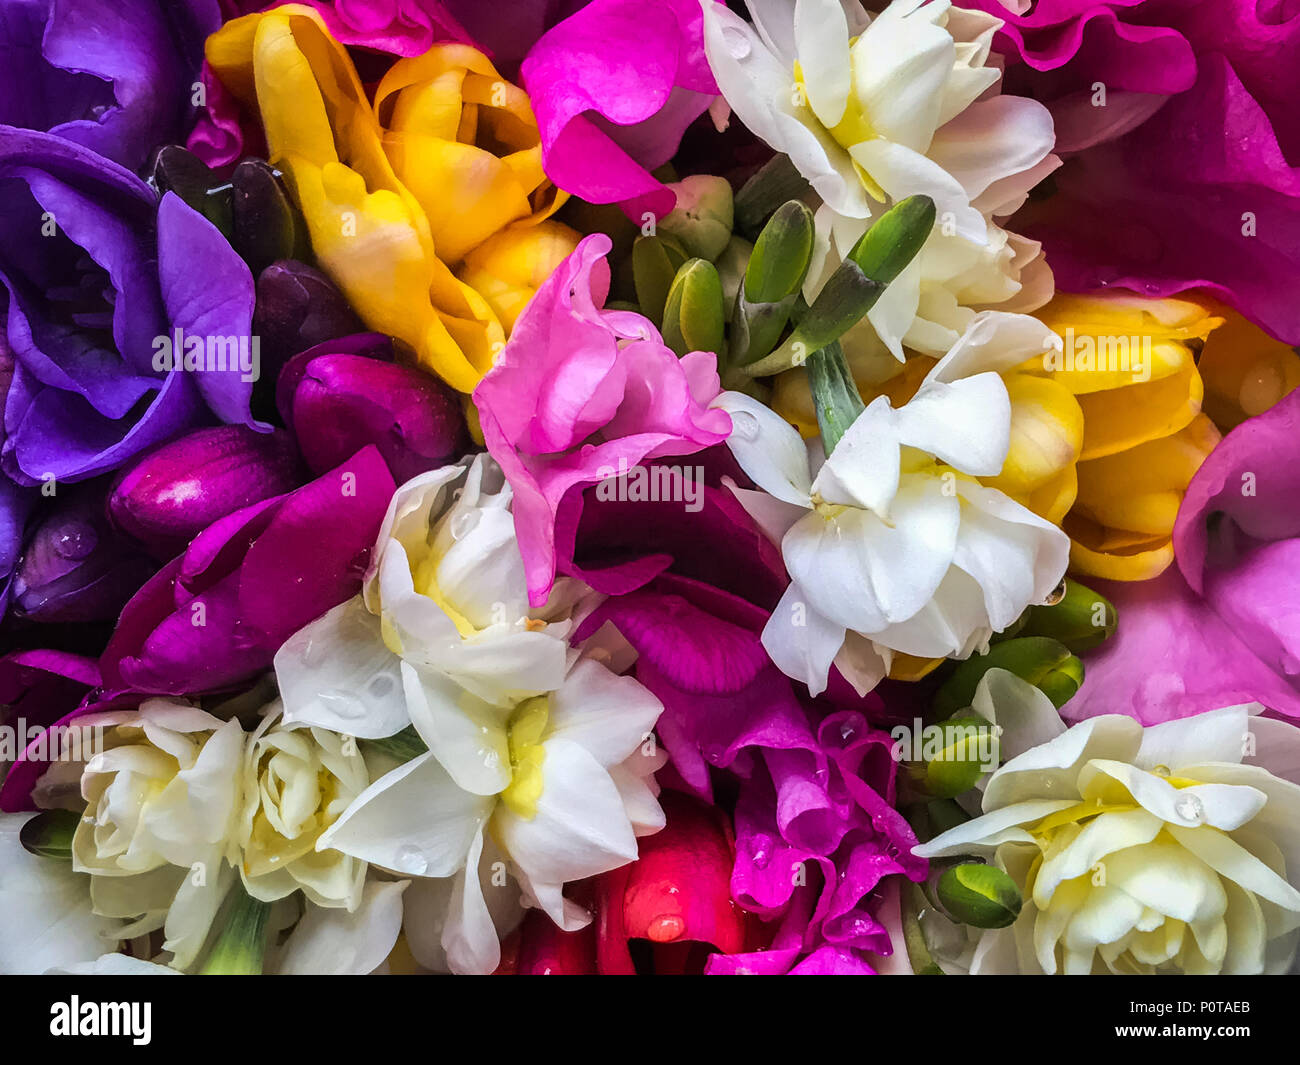 A Bouquet of Spring Flowers Stock Photo